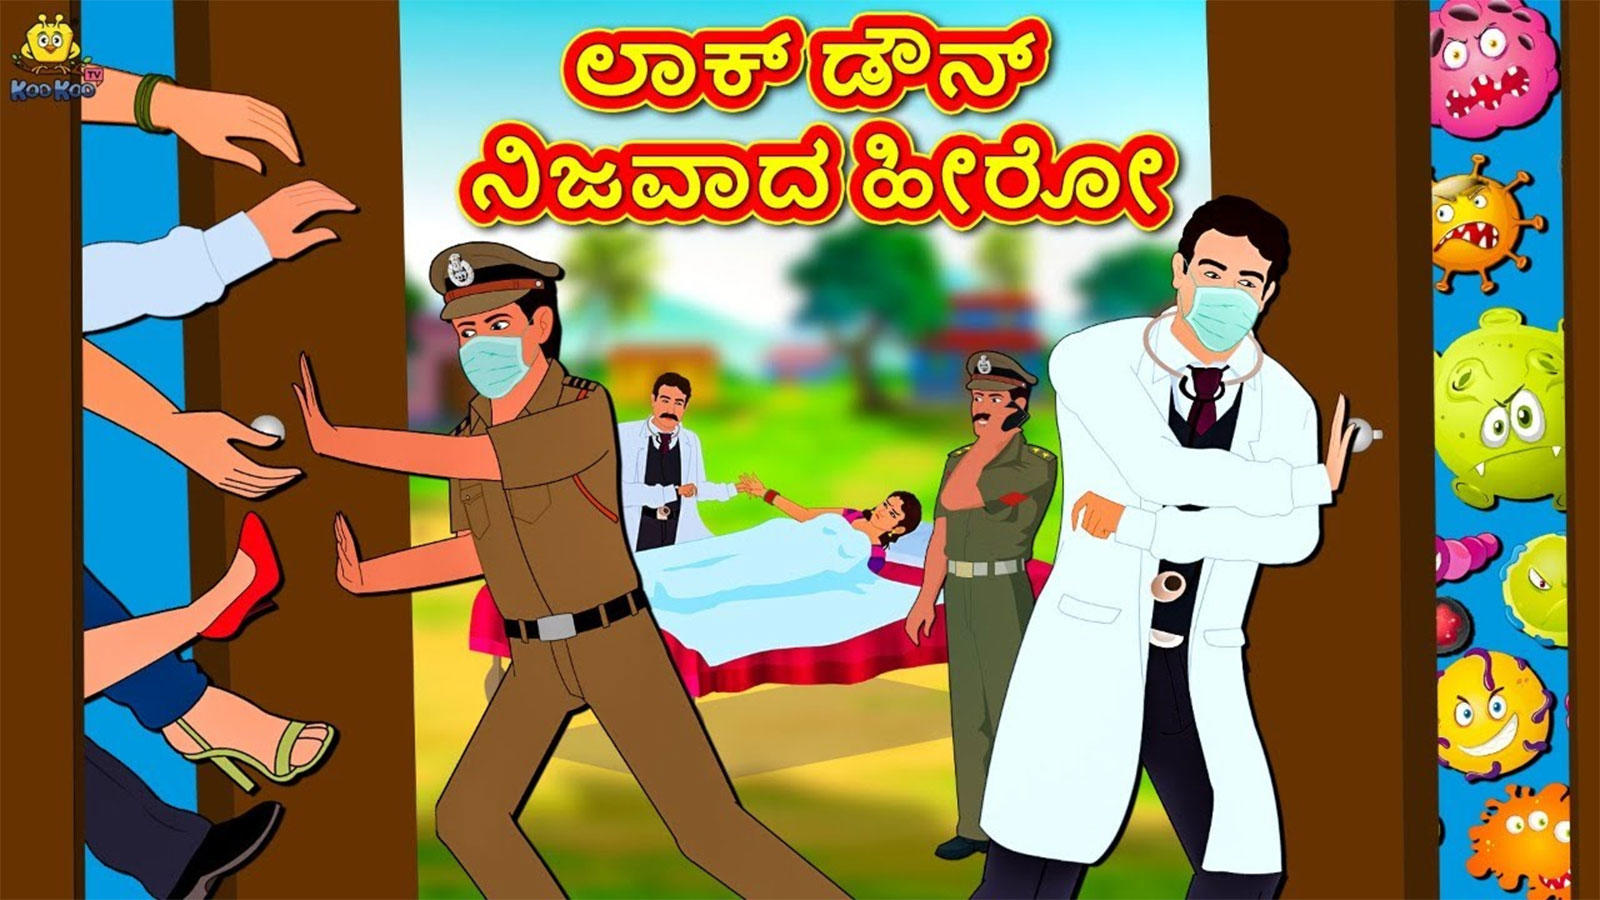 Check Out Latest Children Kannada Nursery Story 'ಲಾಕ್ ಡೌನ್ ನಿಜವಾದ ಹೀರೋ -  Lockdown Real Hero' for Kids - Watch Children's Nursery Stories, Baby  Songs, Fairy Tales In Kannada | Entertainment - Times of India Videos